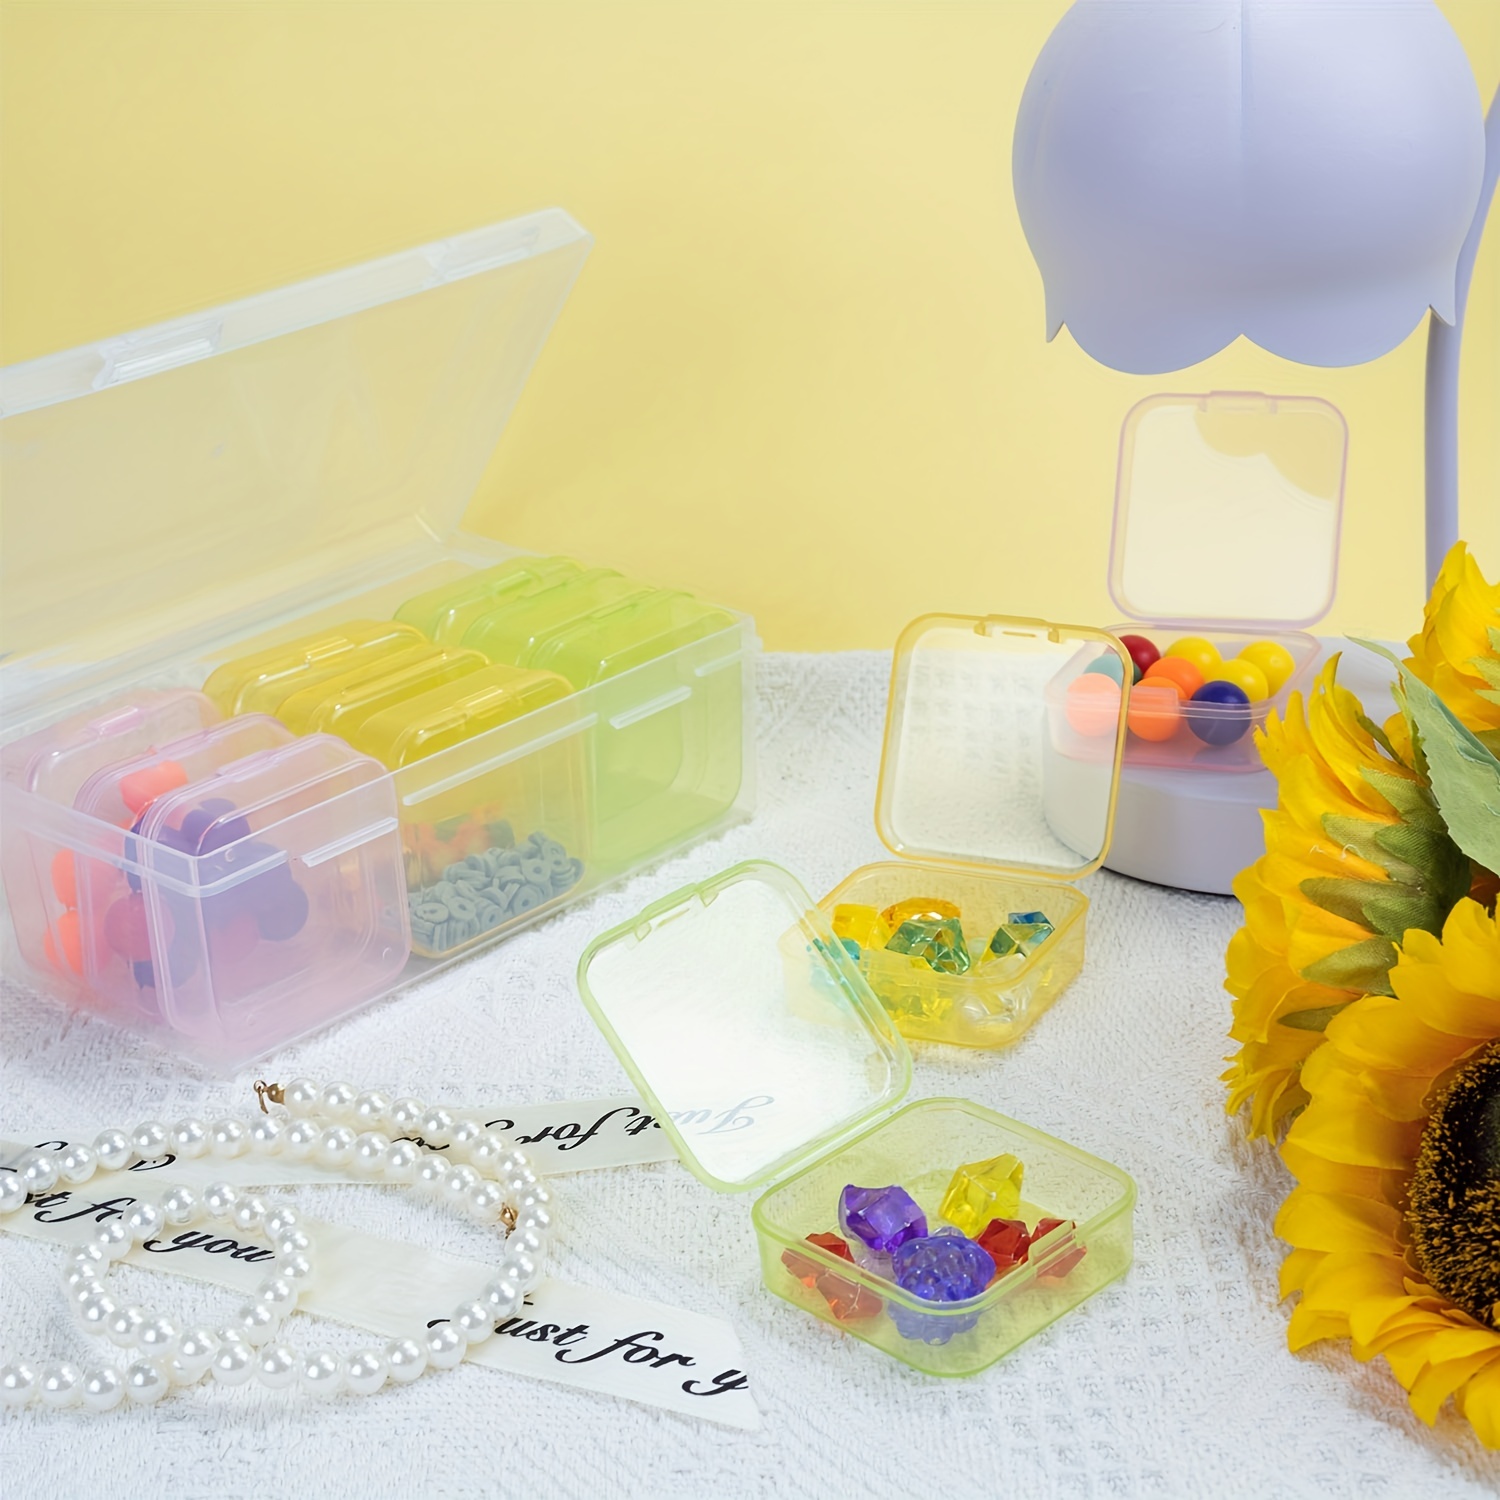 The Beadery 12 Compartment Box